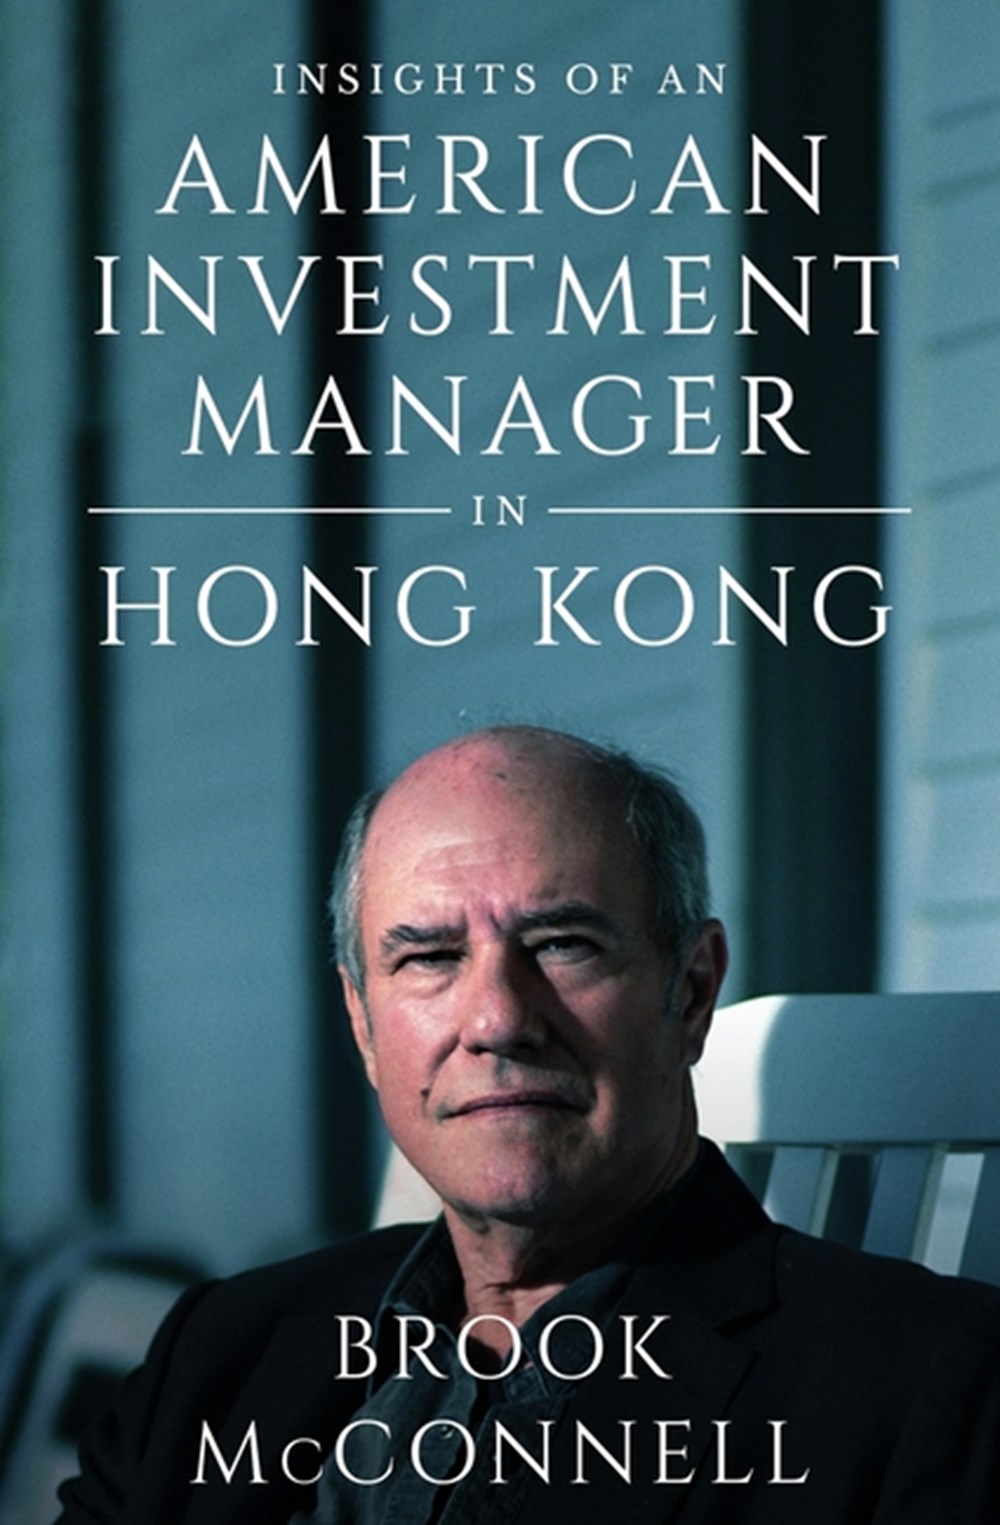 Insights of an American Investment Manager in Hong Kong